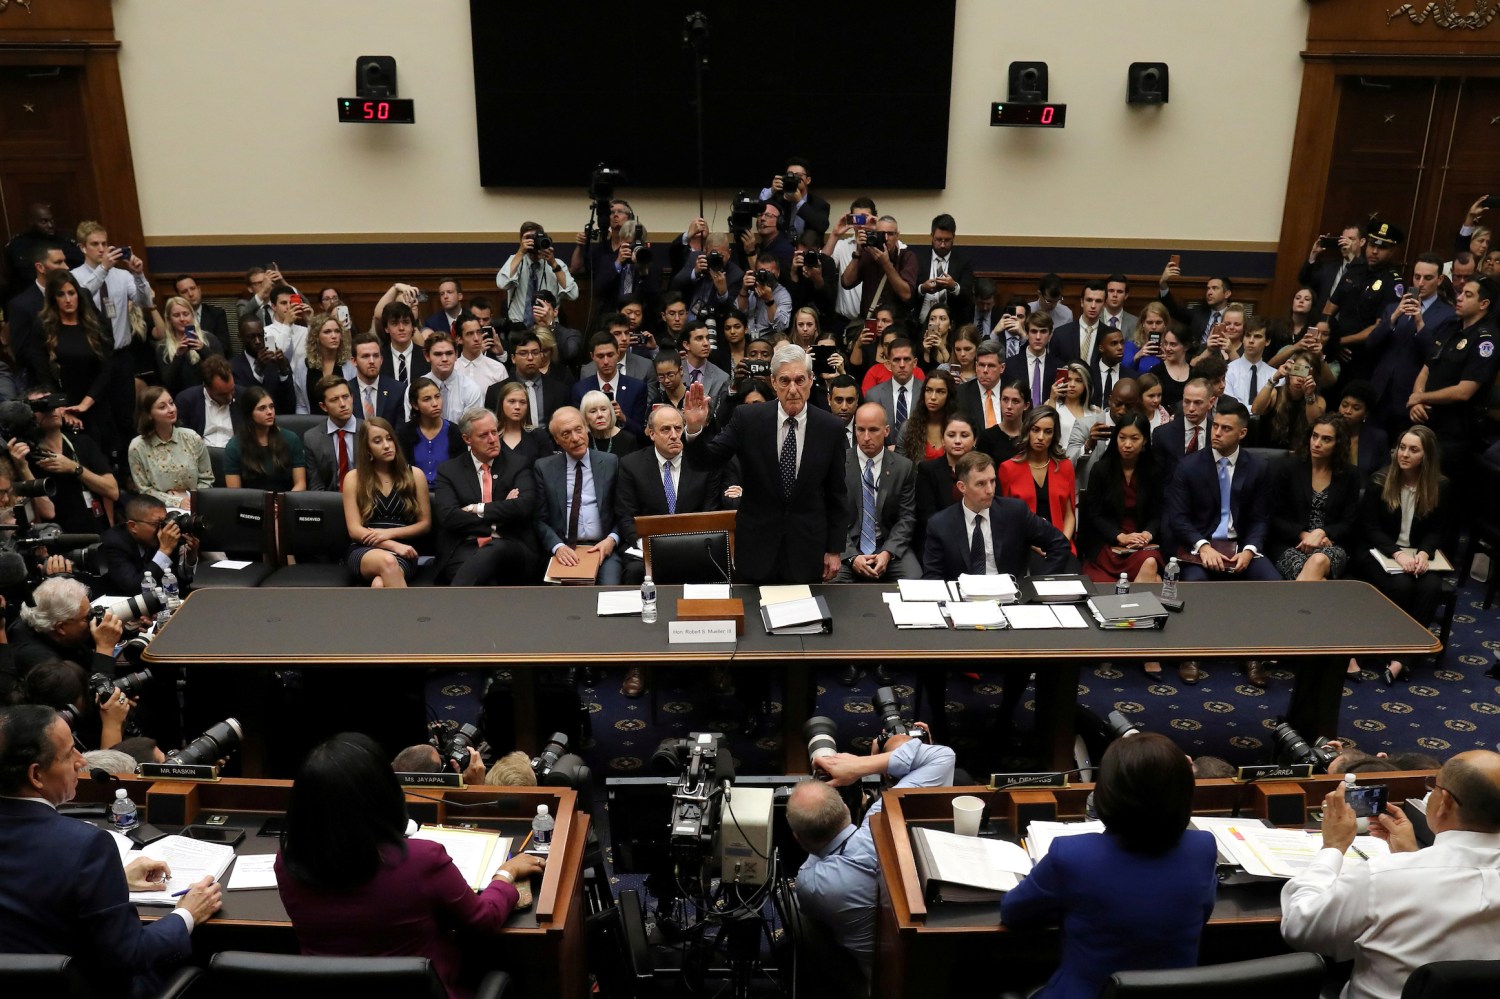 Former special counsel Robert Mueller is sworn in before testifying to the House Judiciary Committee about his report on Russian interference in the 2016 presidential election in the Rayburn House Office Building, in Washington, D.C., U.S. July 24, 2019.  Chip Somodevilla/Pool via Reuters - RC18639DA8F0